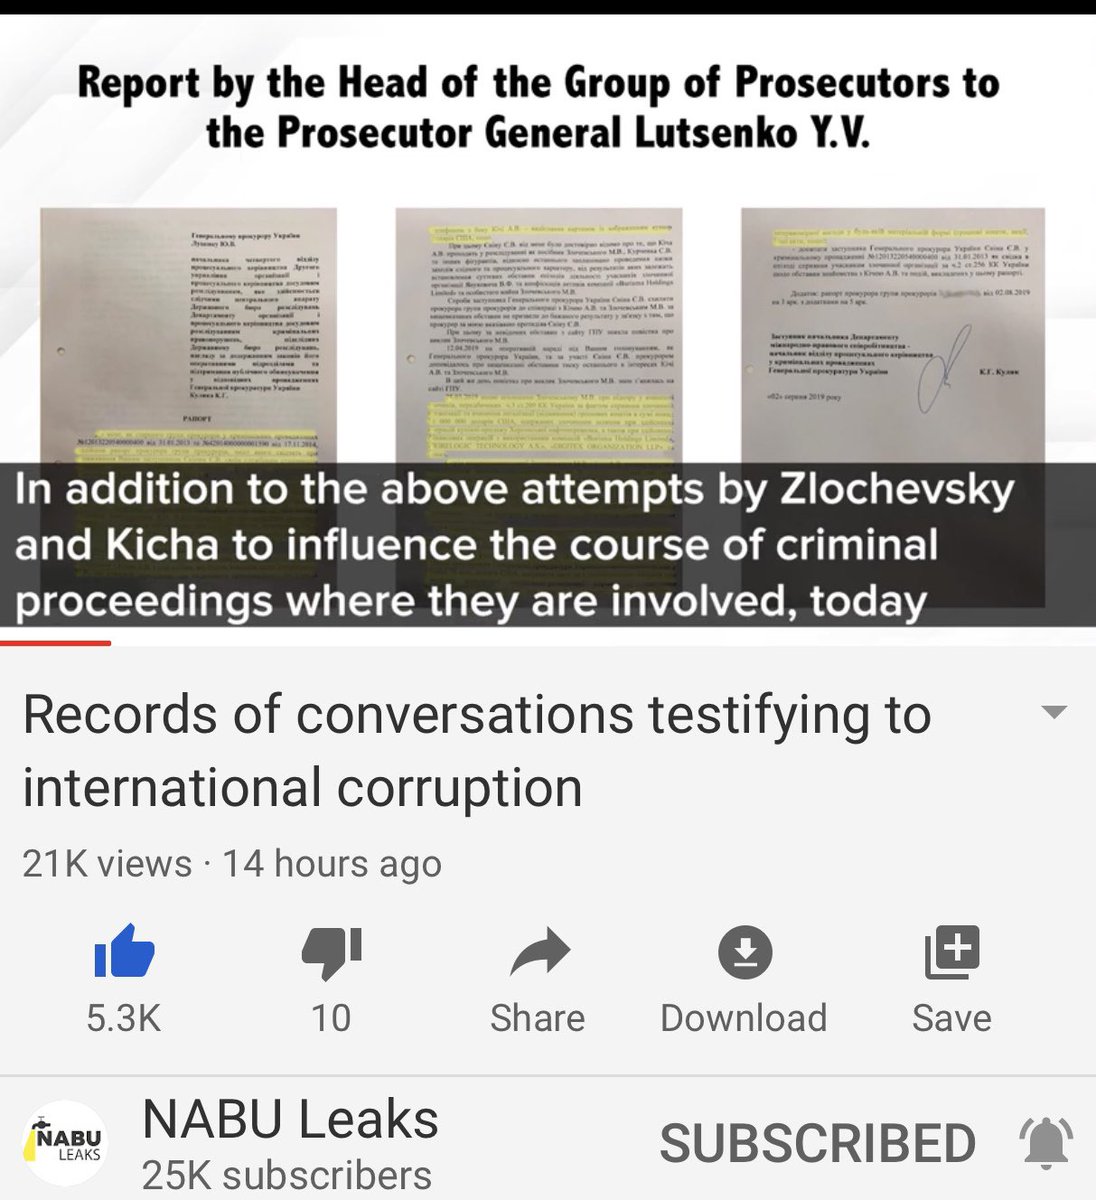 Here he talks about Zlochevsky and Kicha trying to influence the investigation and the $50 mil bribe paid by Zlochevsky